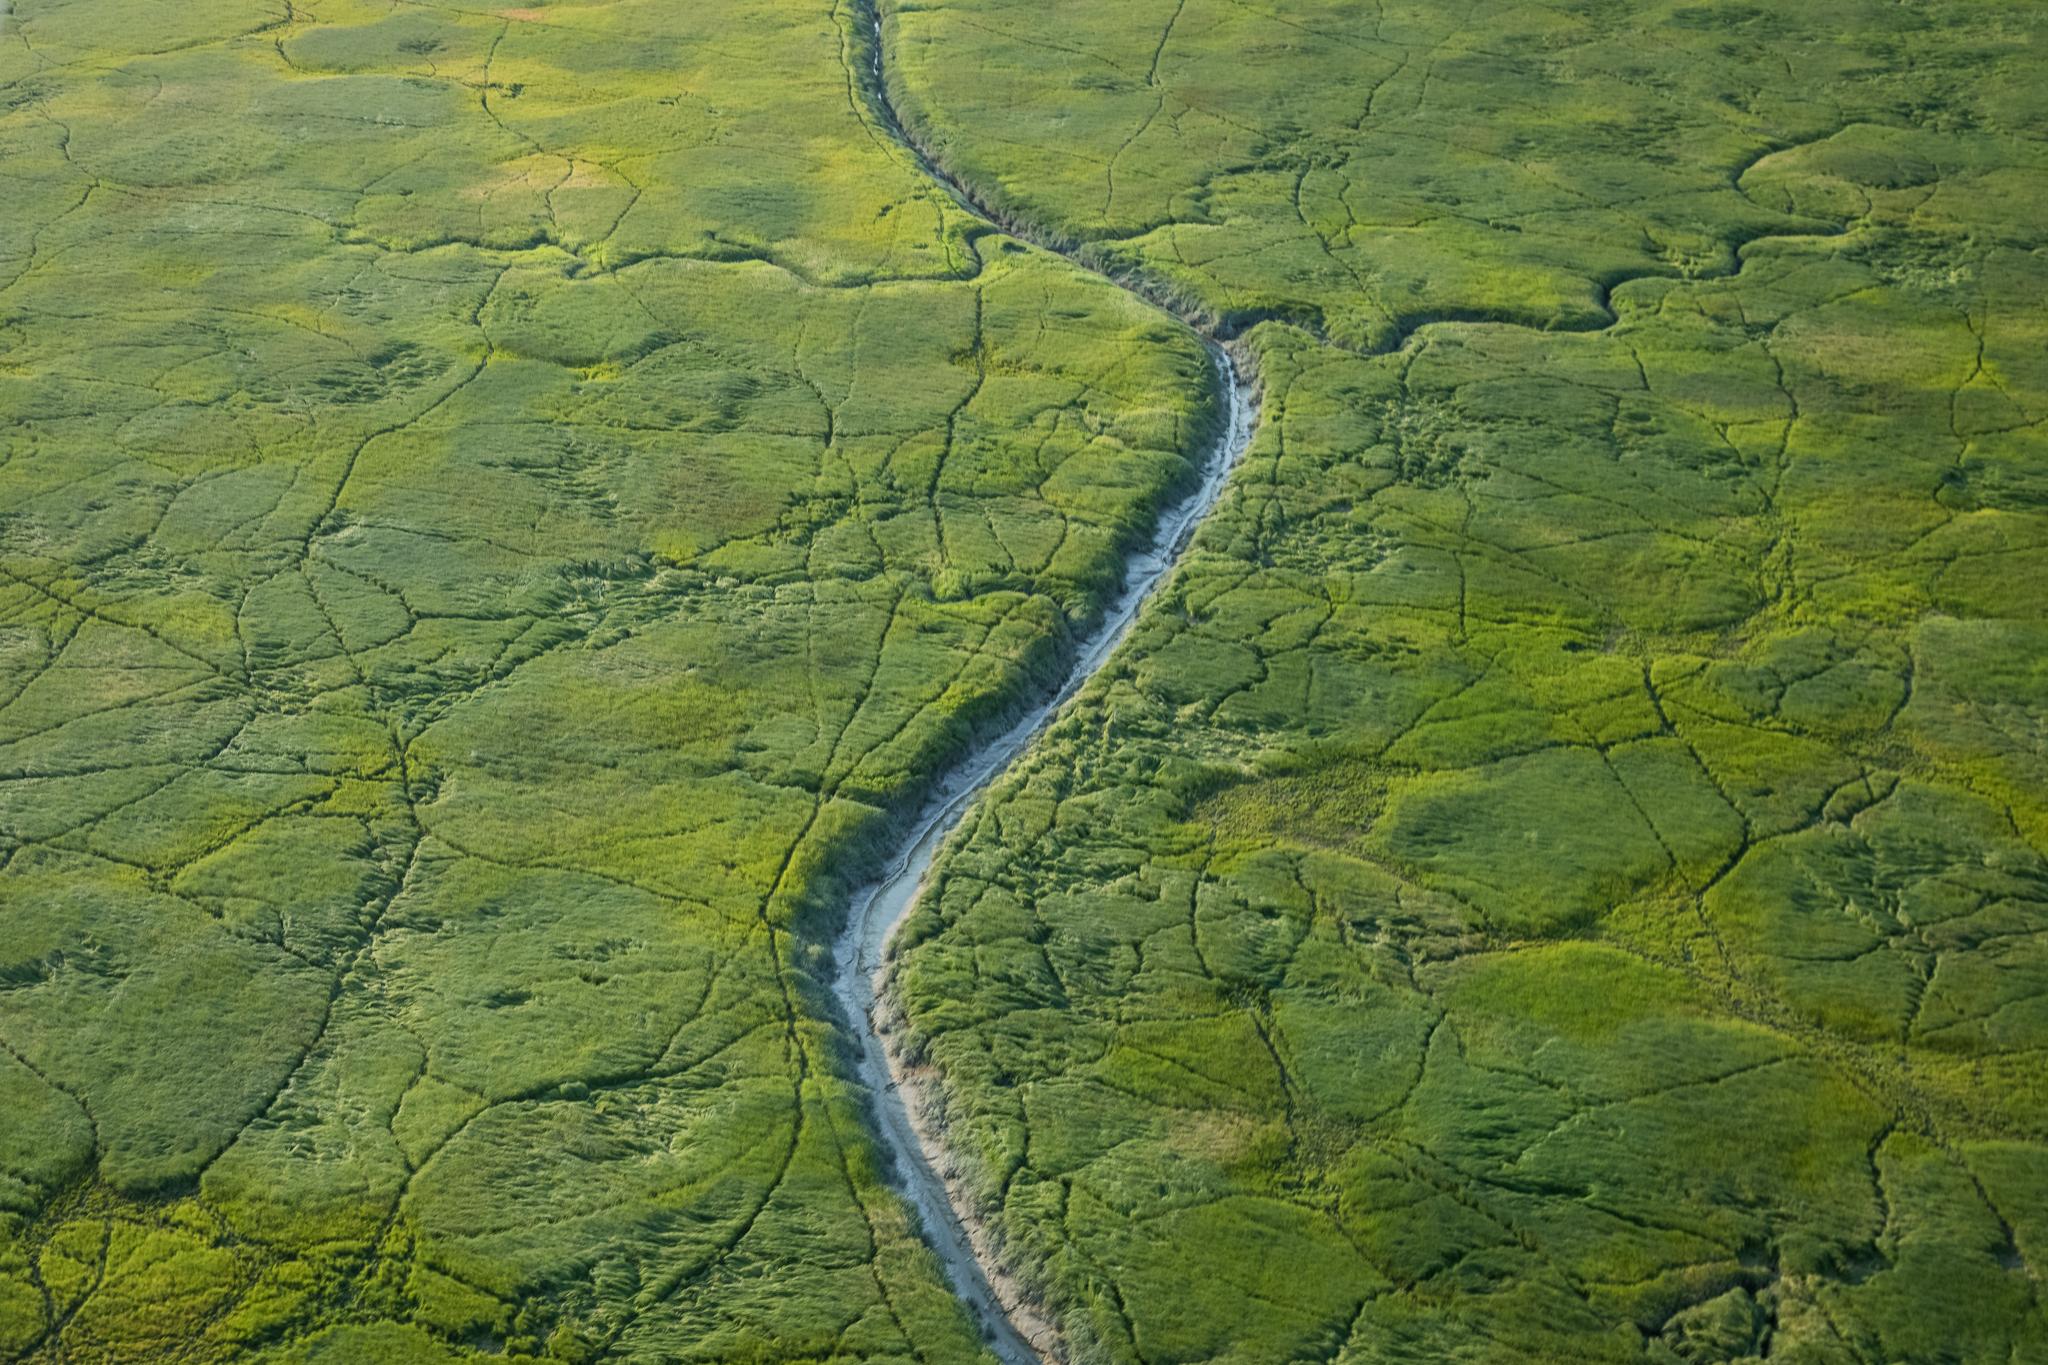 Brown bear trails create mazes through the sedge grass of Chinitna Bay. Sedges, which can have as...